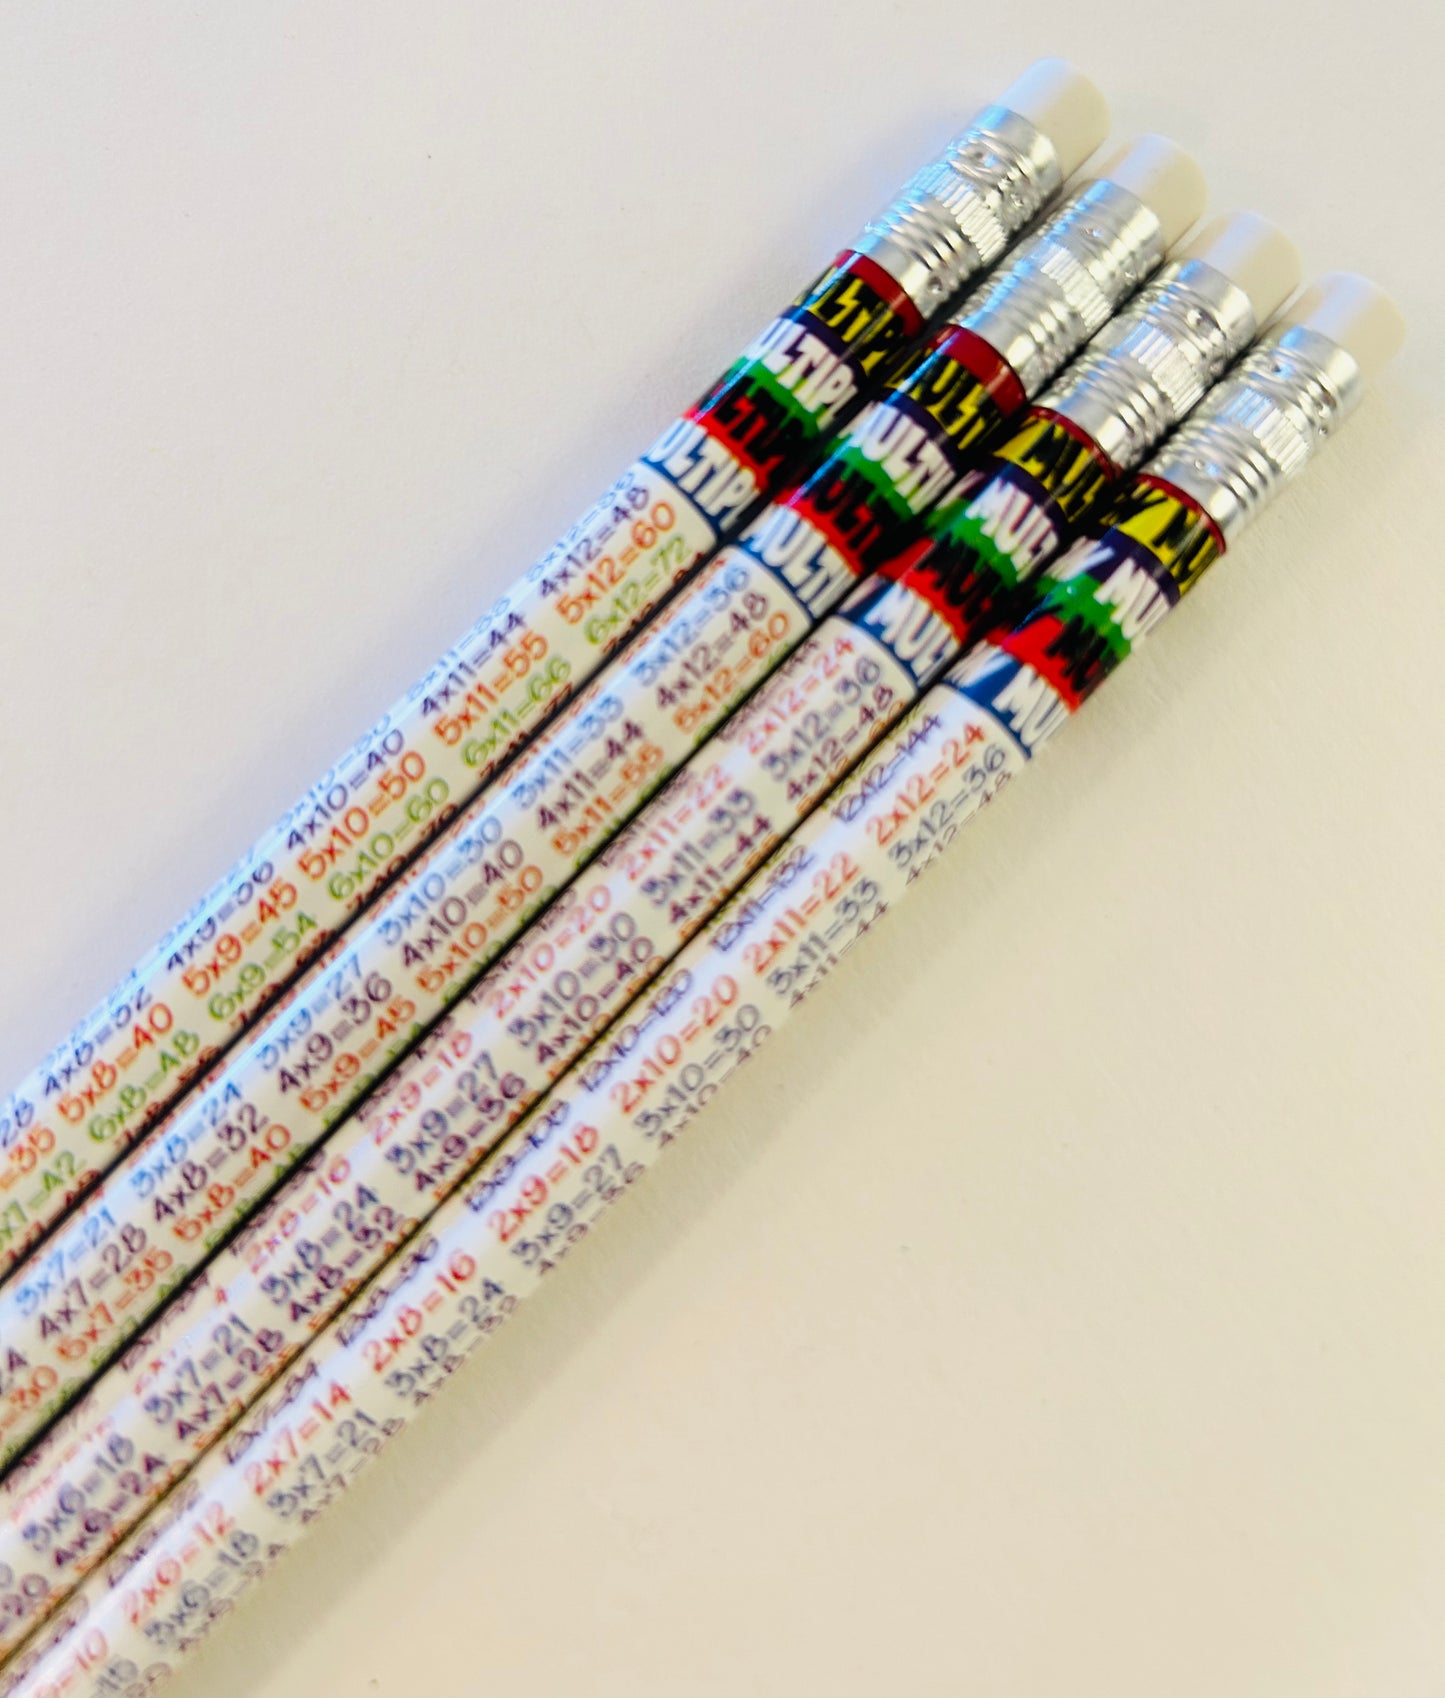 Multiplication Tables Pencil Pack